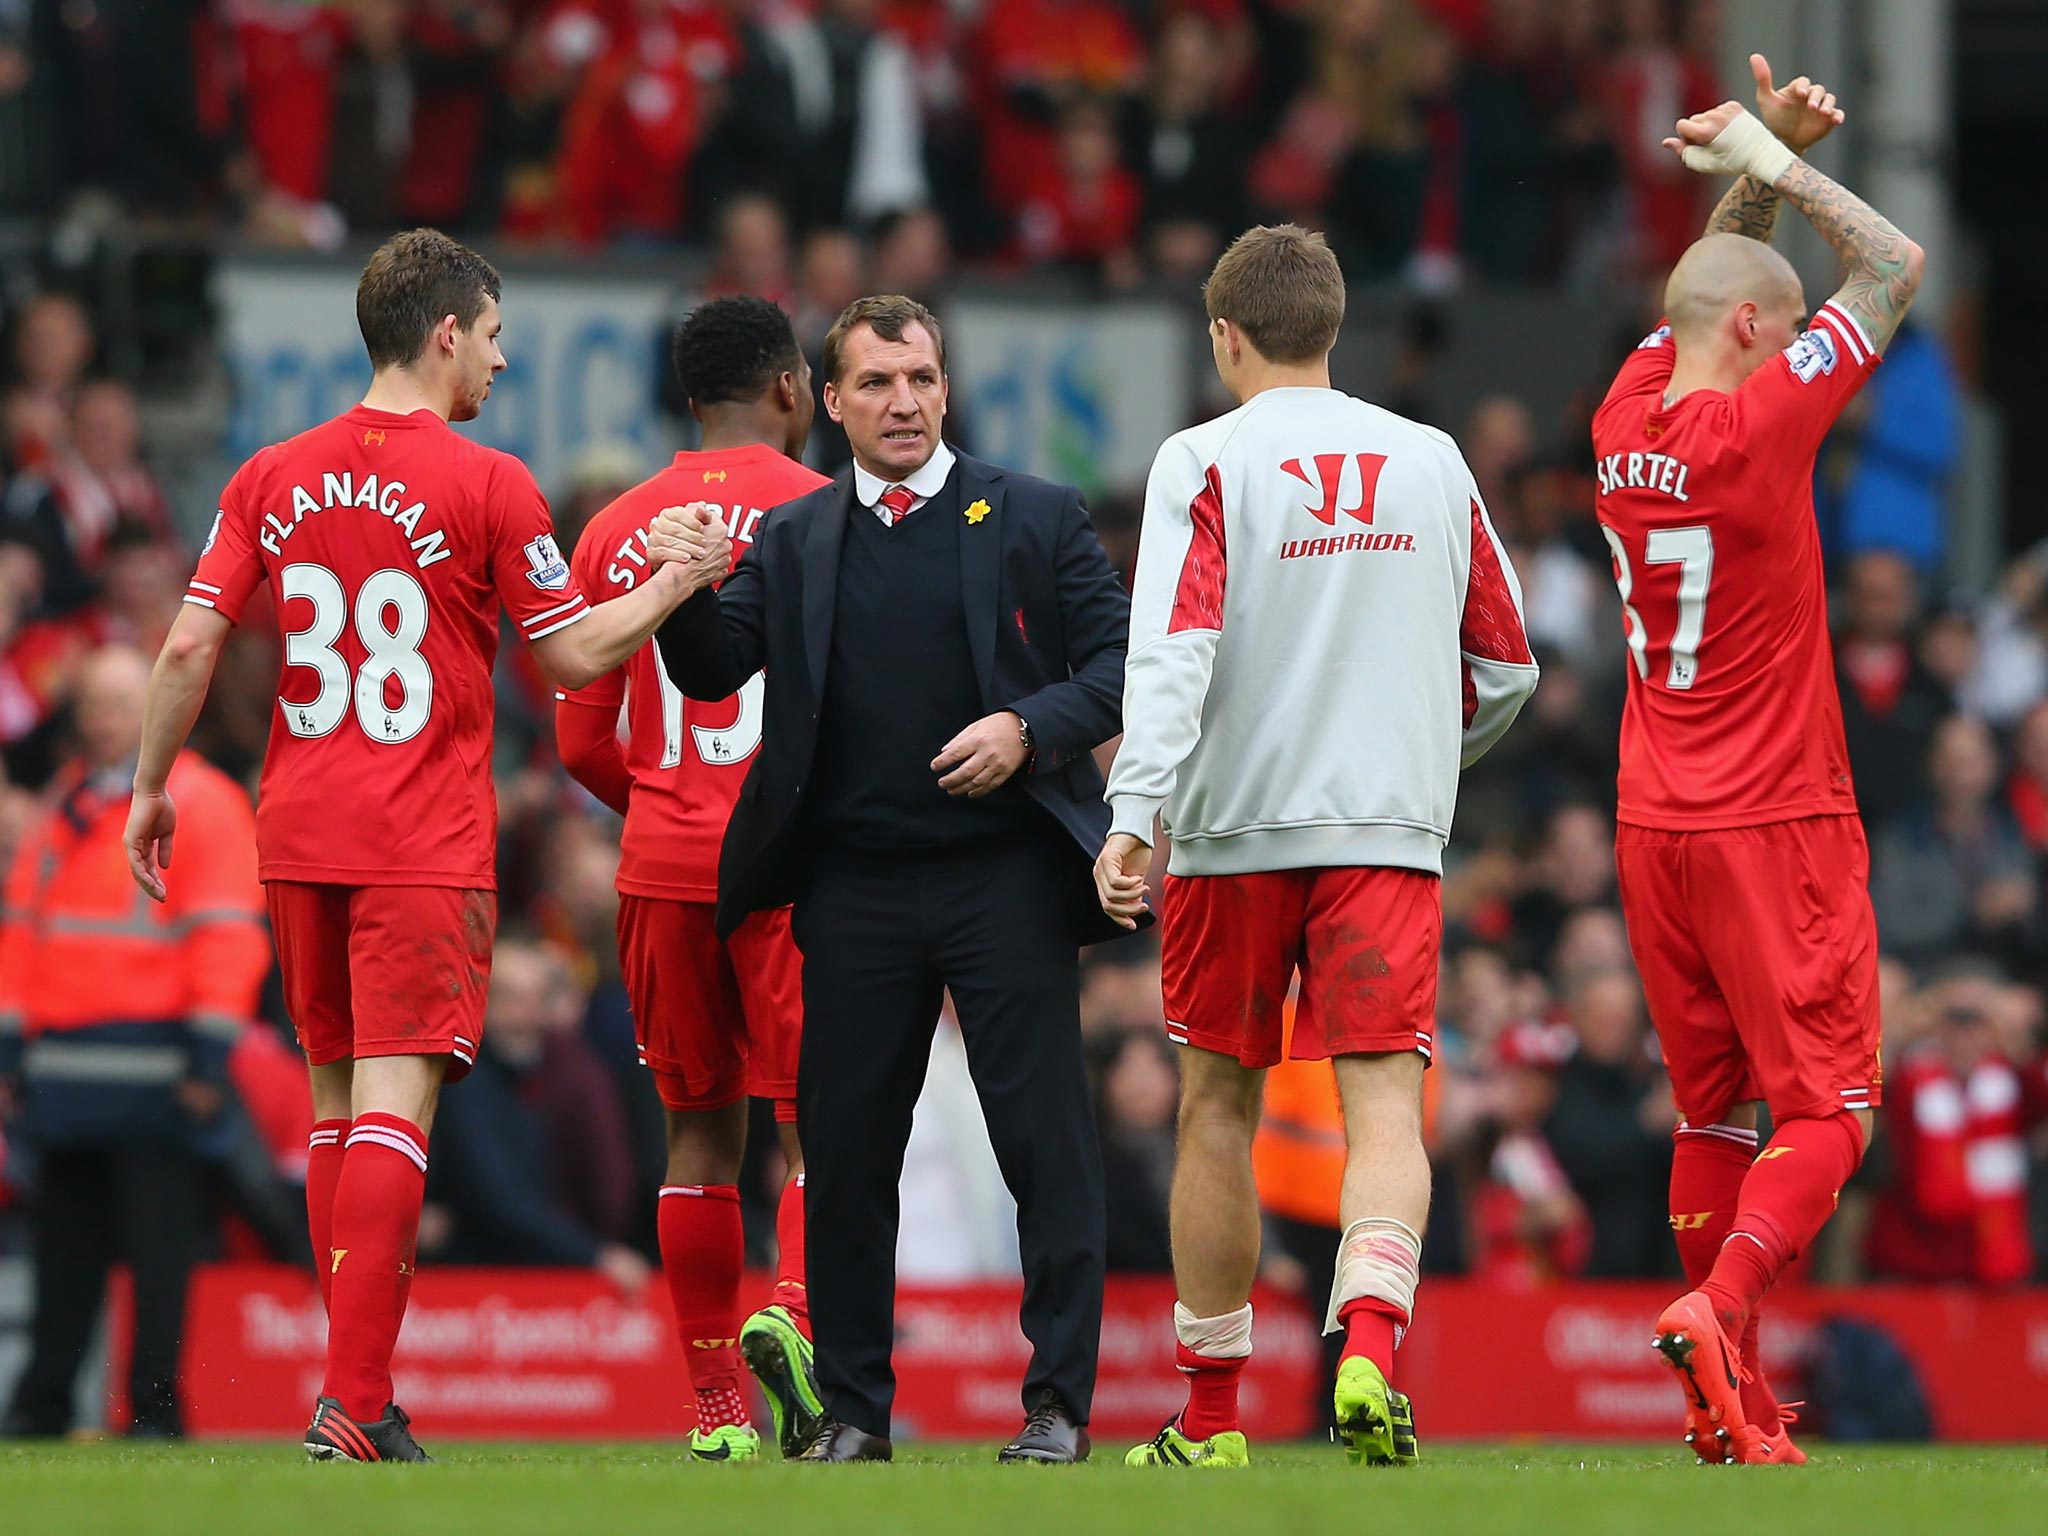 Brendan Rodgers celebrates Liverpool's 4-0 victory over Tottenham with his players